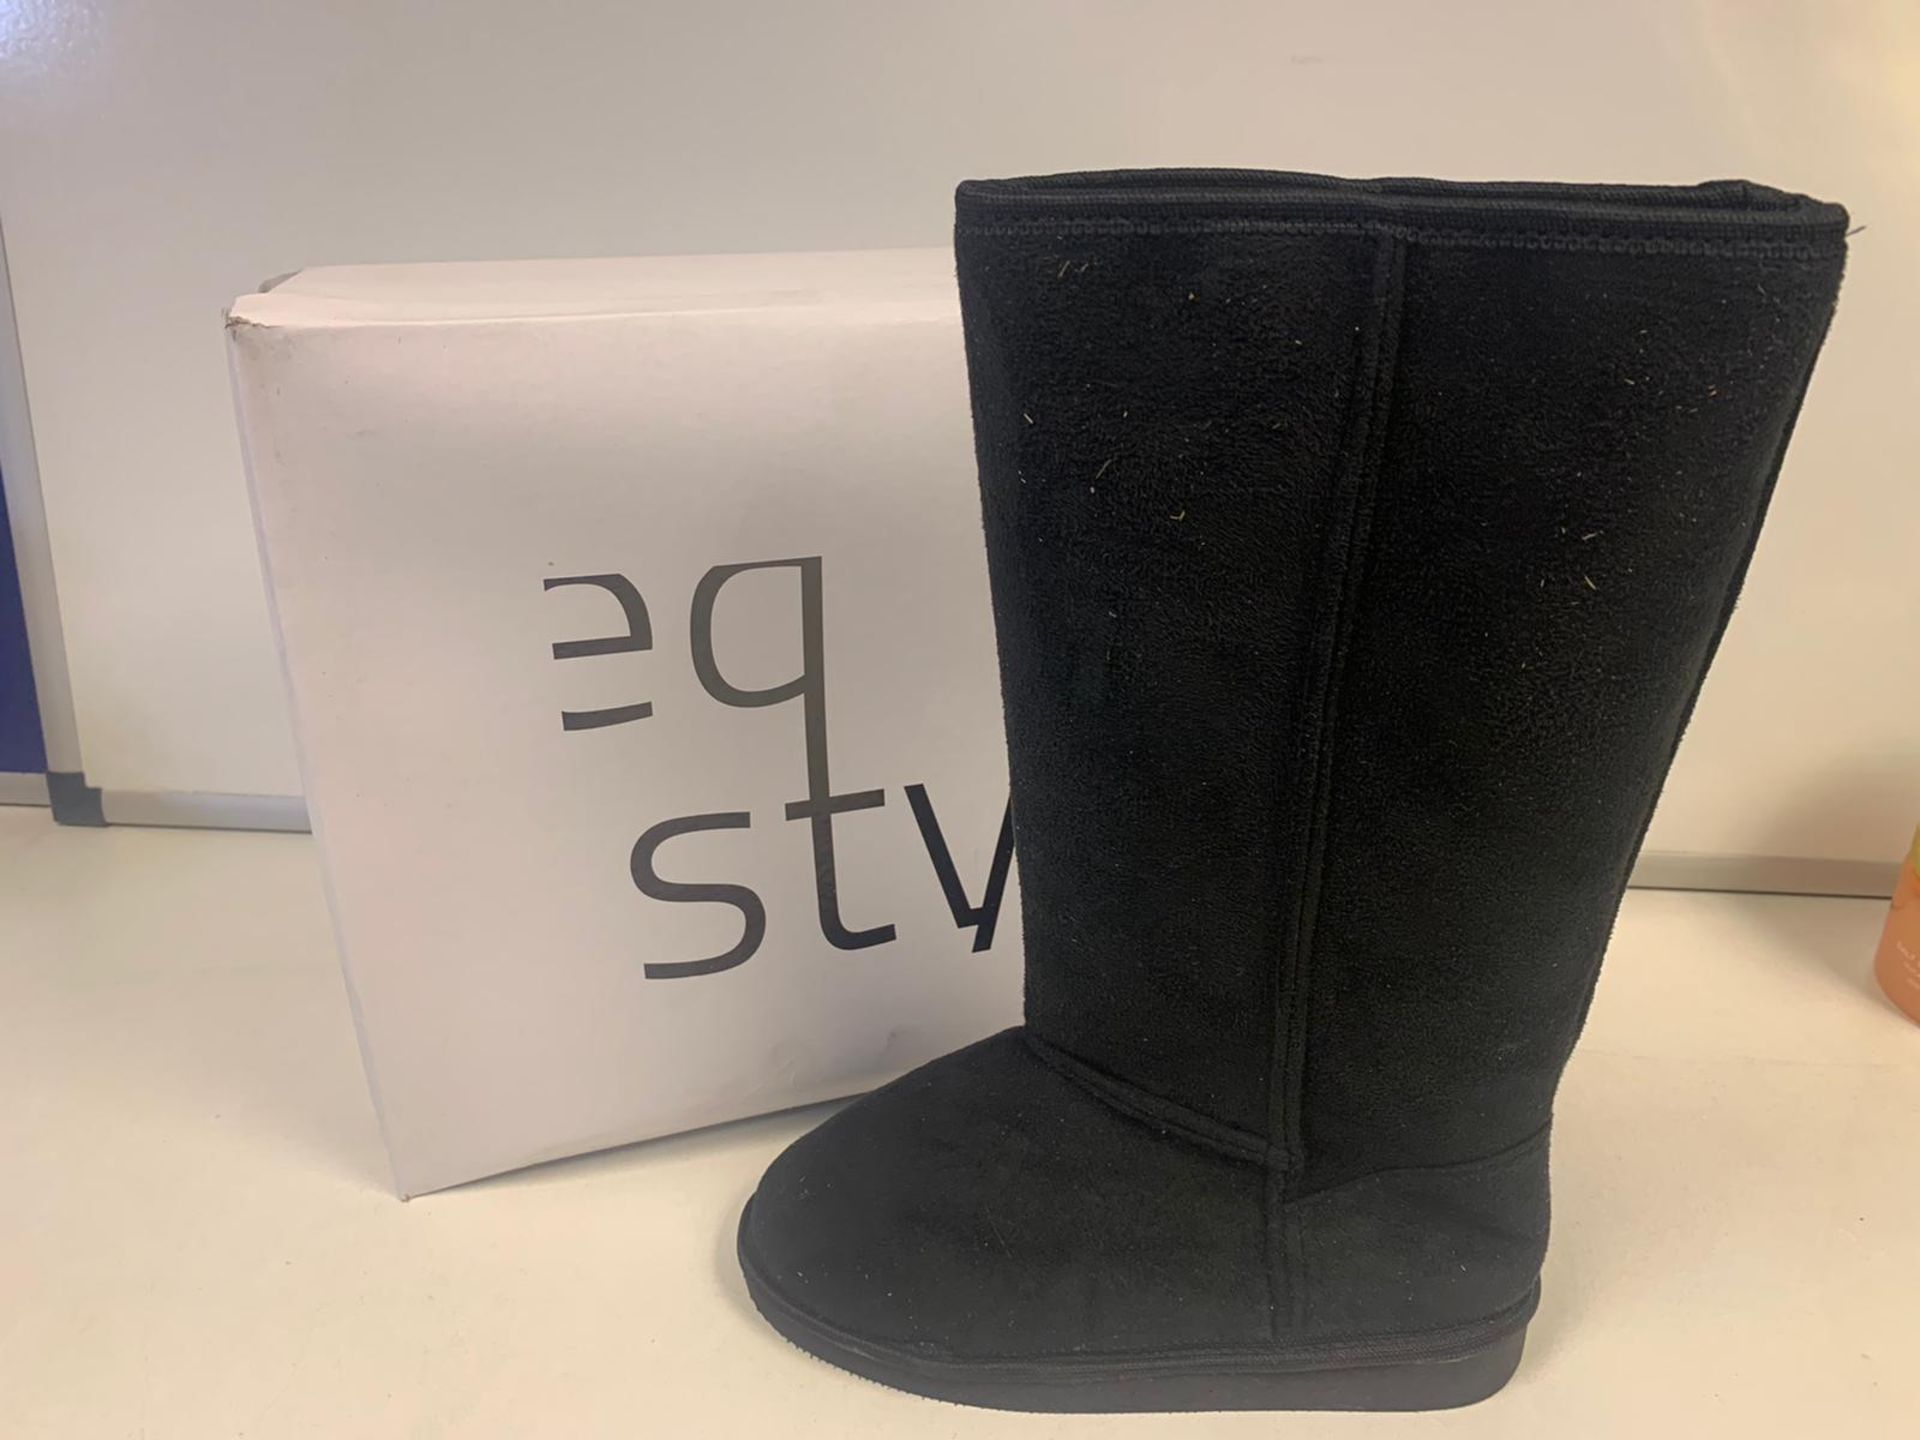 20 X BRAND NEW BOXED EQ STYLE WINTER BOOTS BLACK SIZE 3 IN 2 BOXES